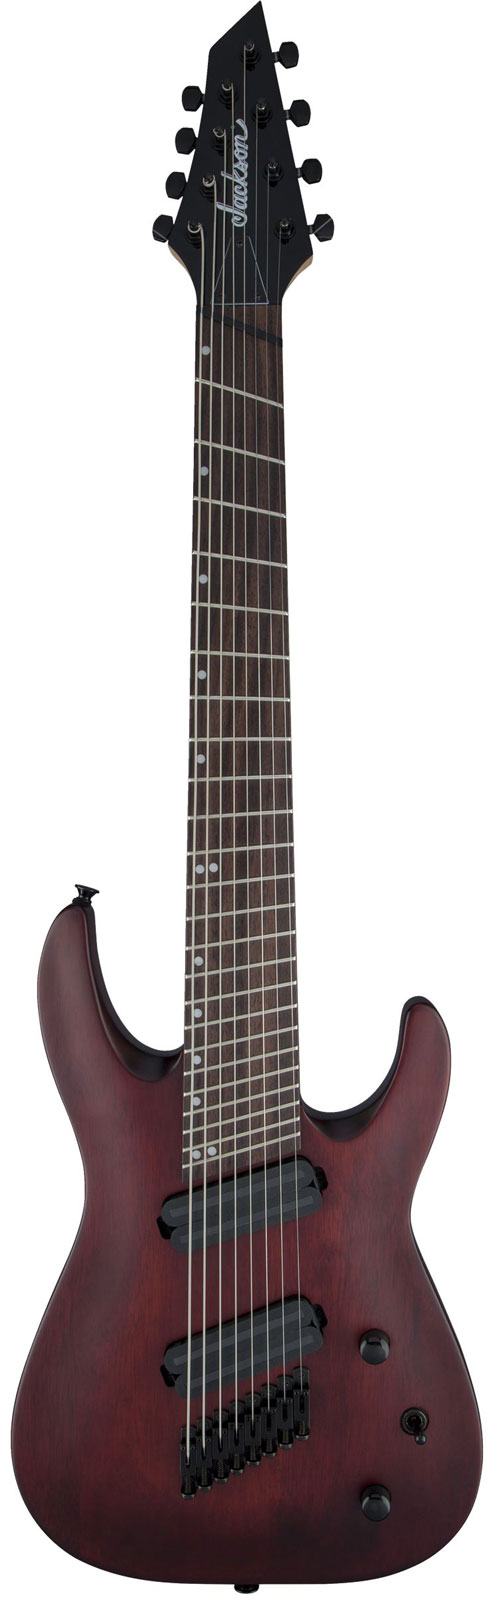 JACKSON GUITARS X DINKY ARCH TOP DKAF8 MS LRL, MULTI-SCALE, STAINED MAHOGANY